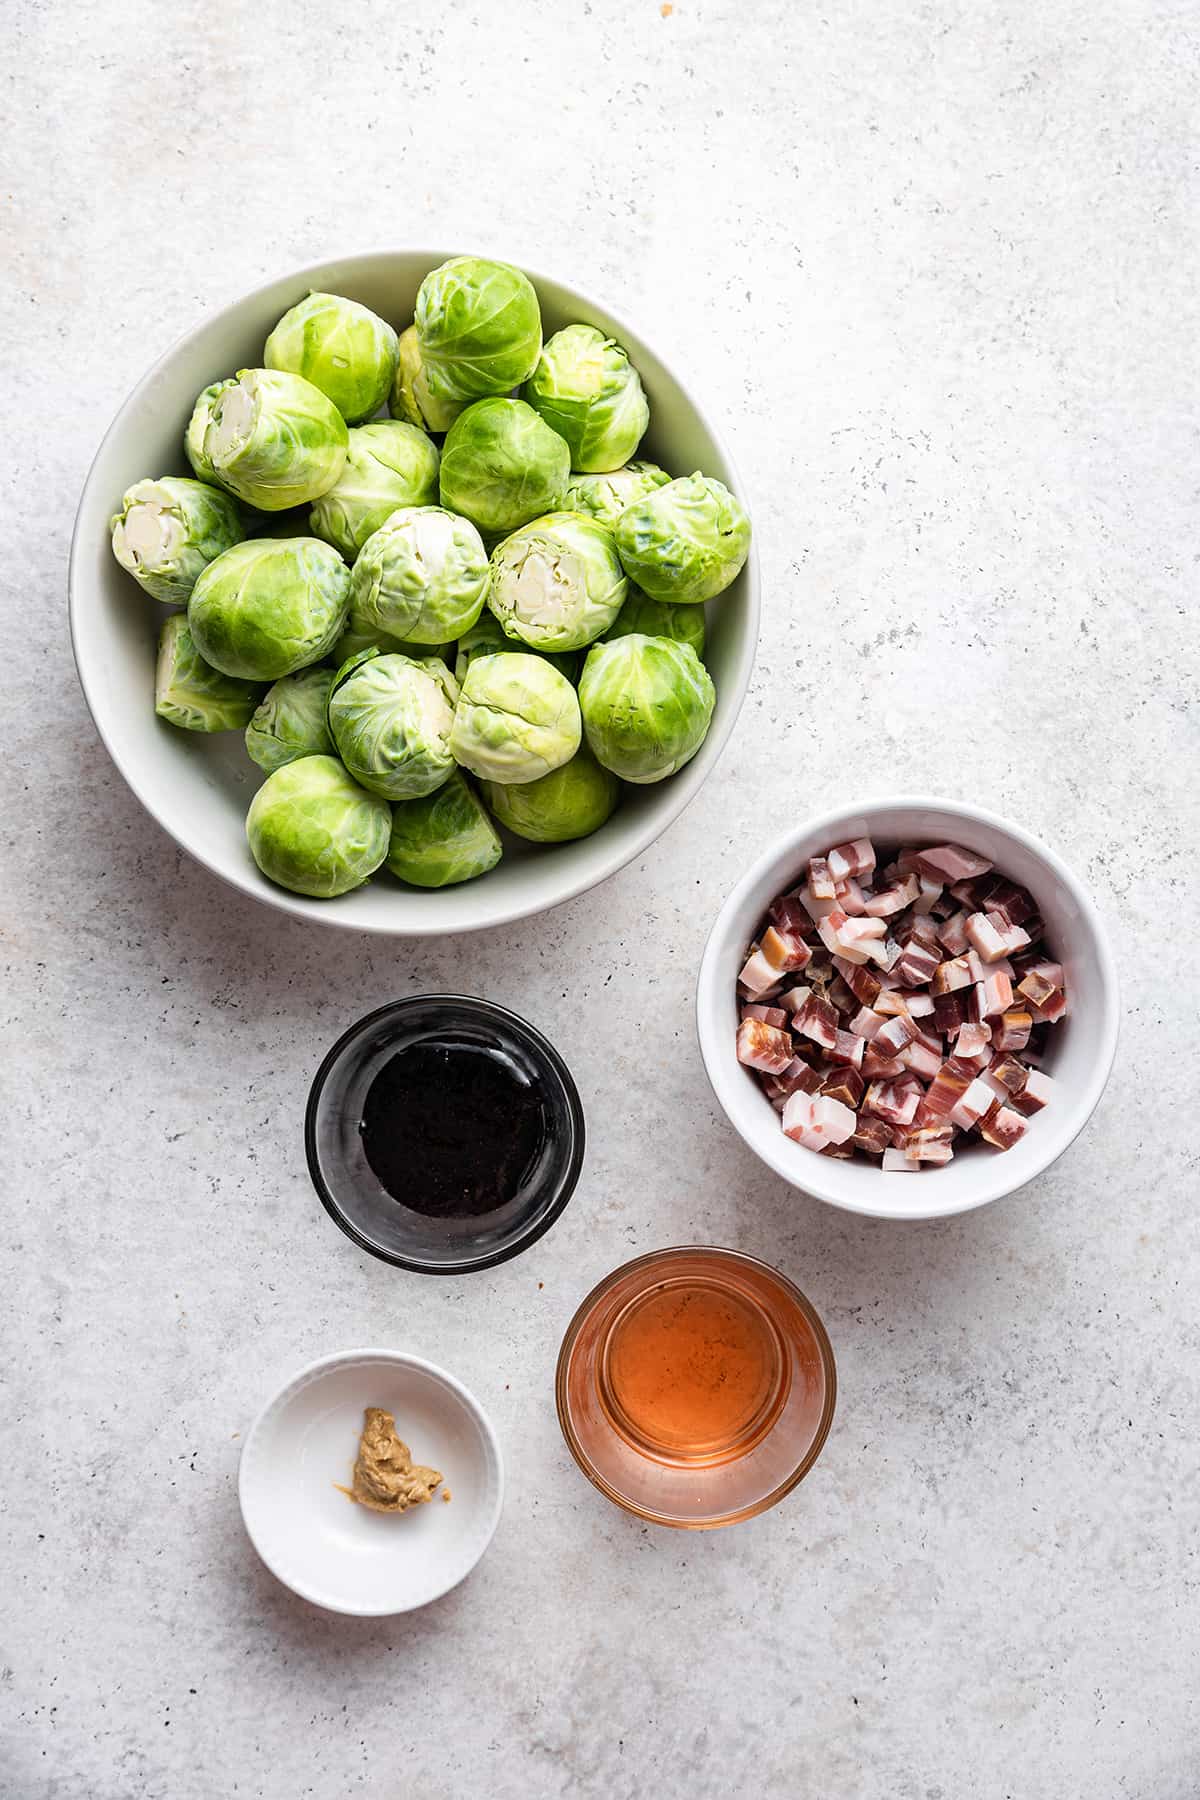 A bowl of fresh Brussels sprouts, balsamic glaze, red wine vinegar, dijon mustard and diced pancetta on a white countertop.